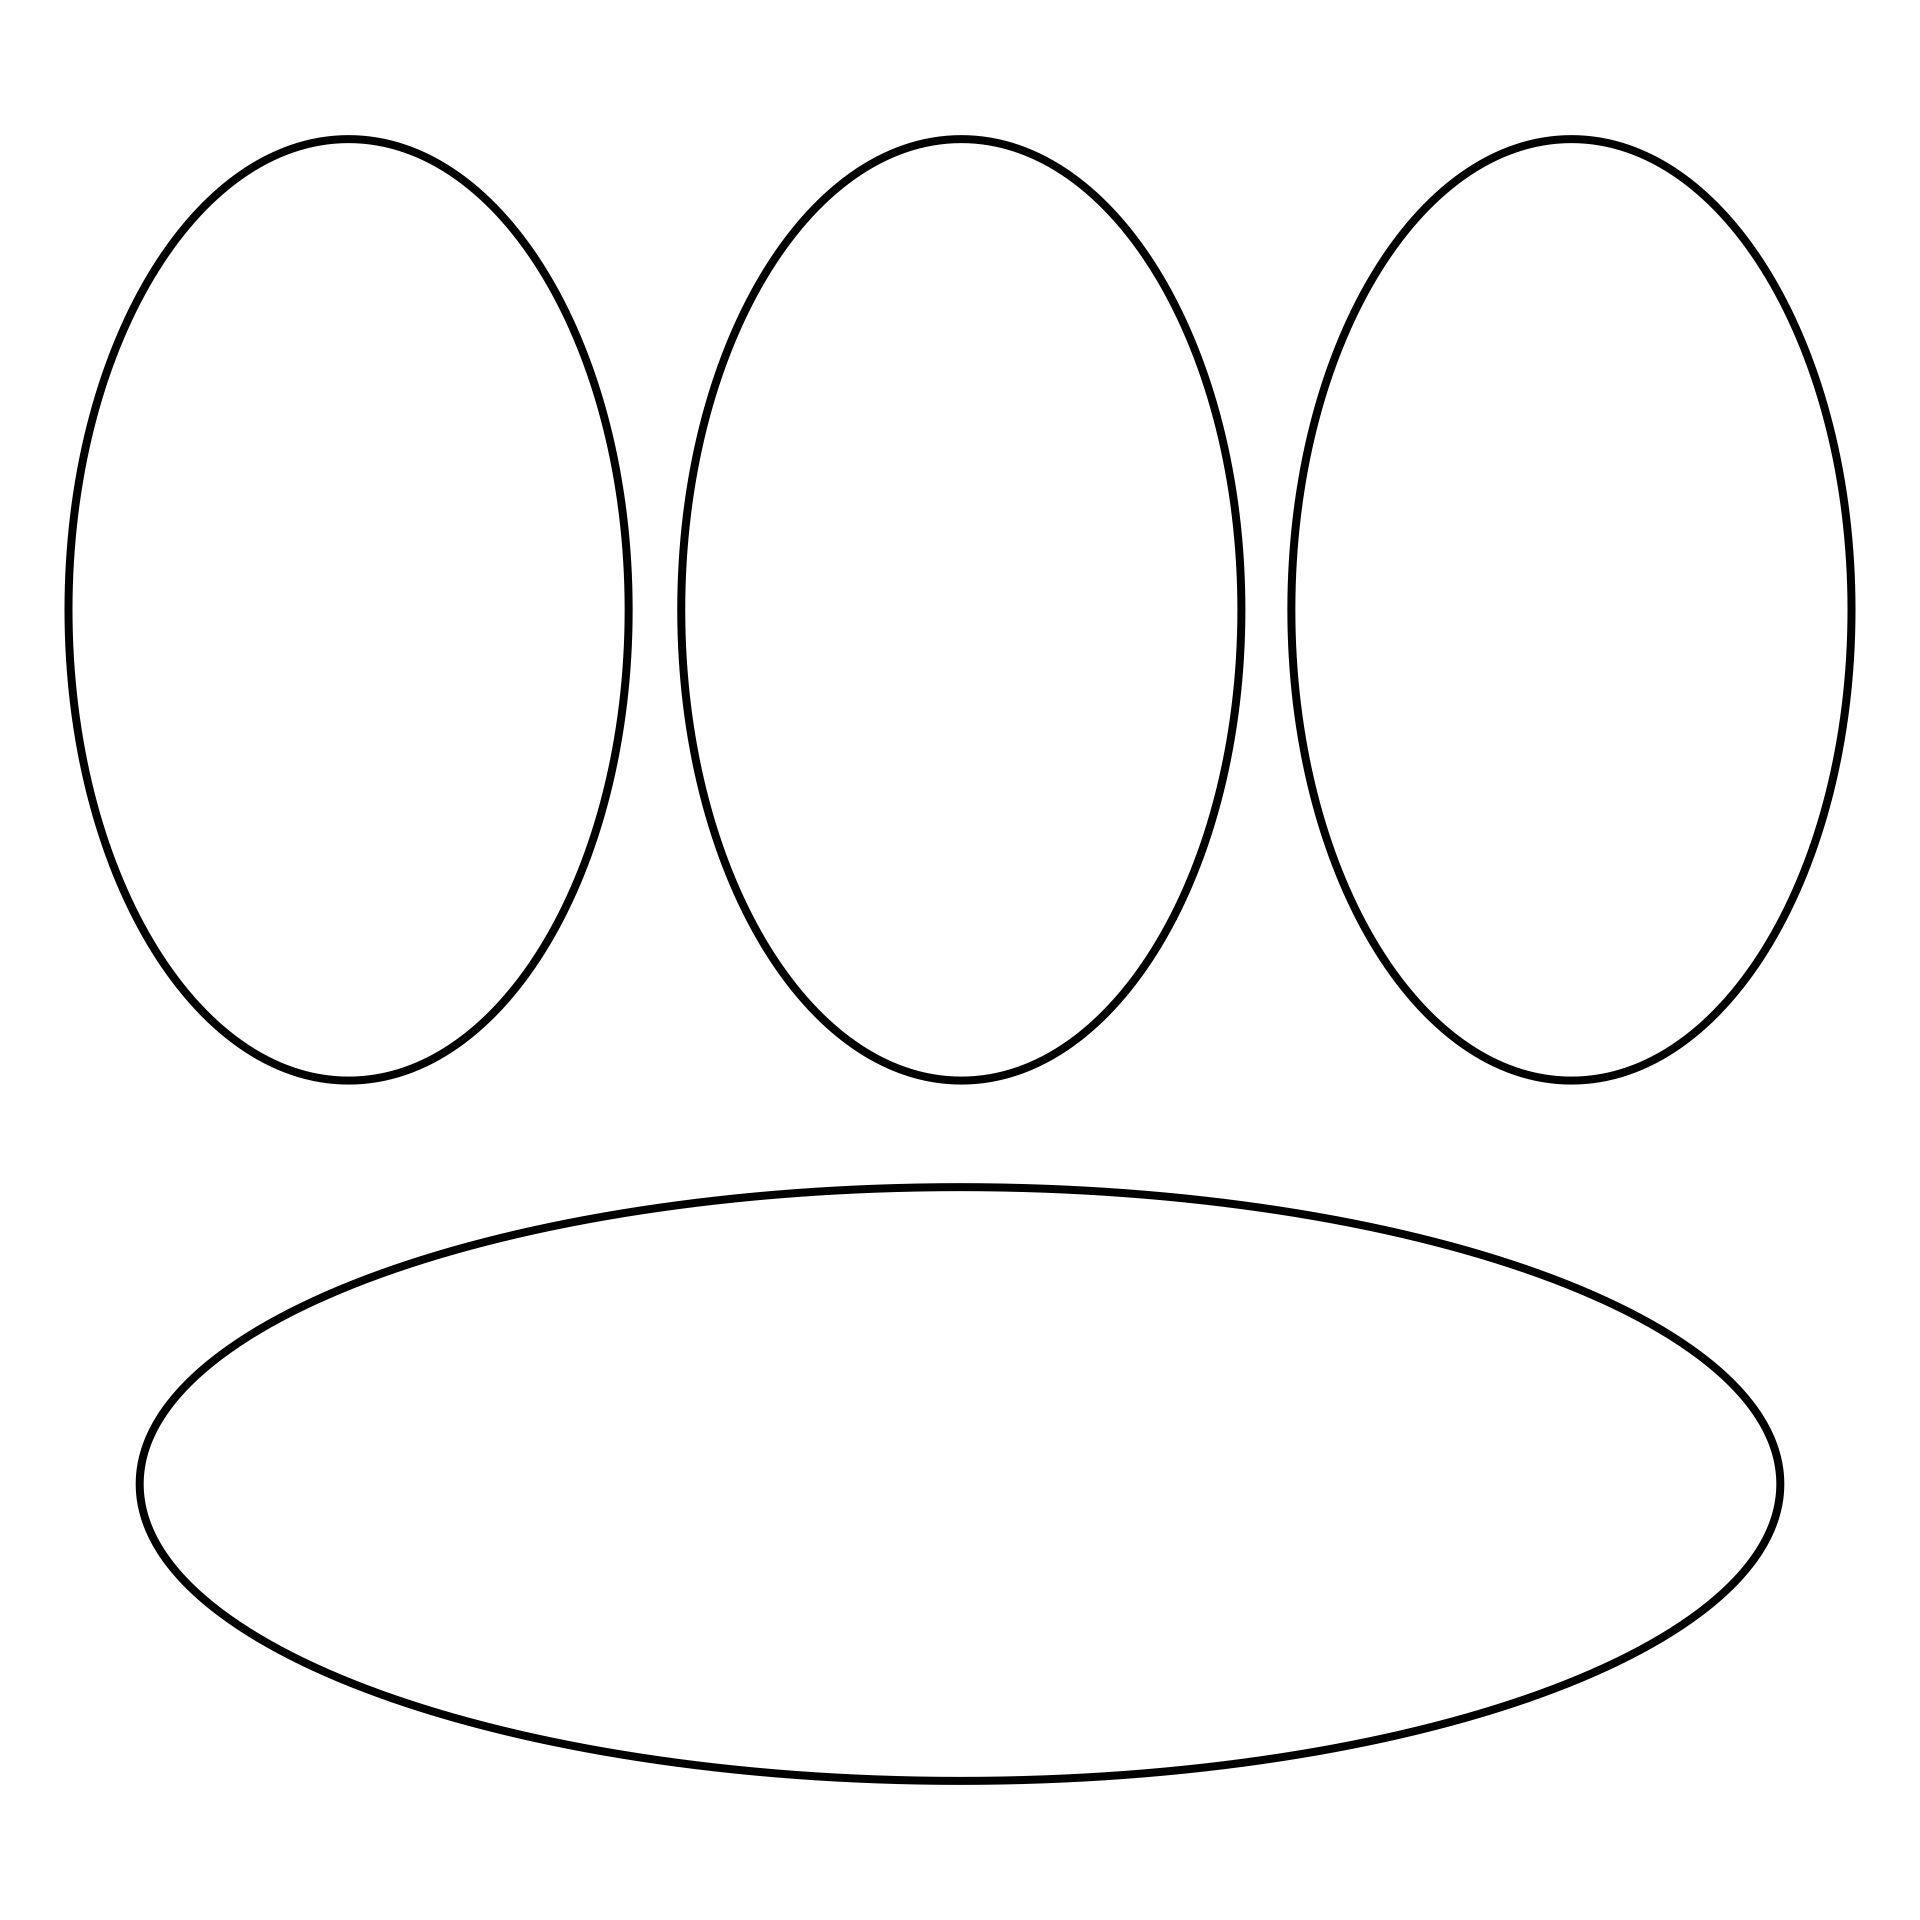 7 Best Images of Free Printable Oval Template Oval Shape Template